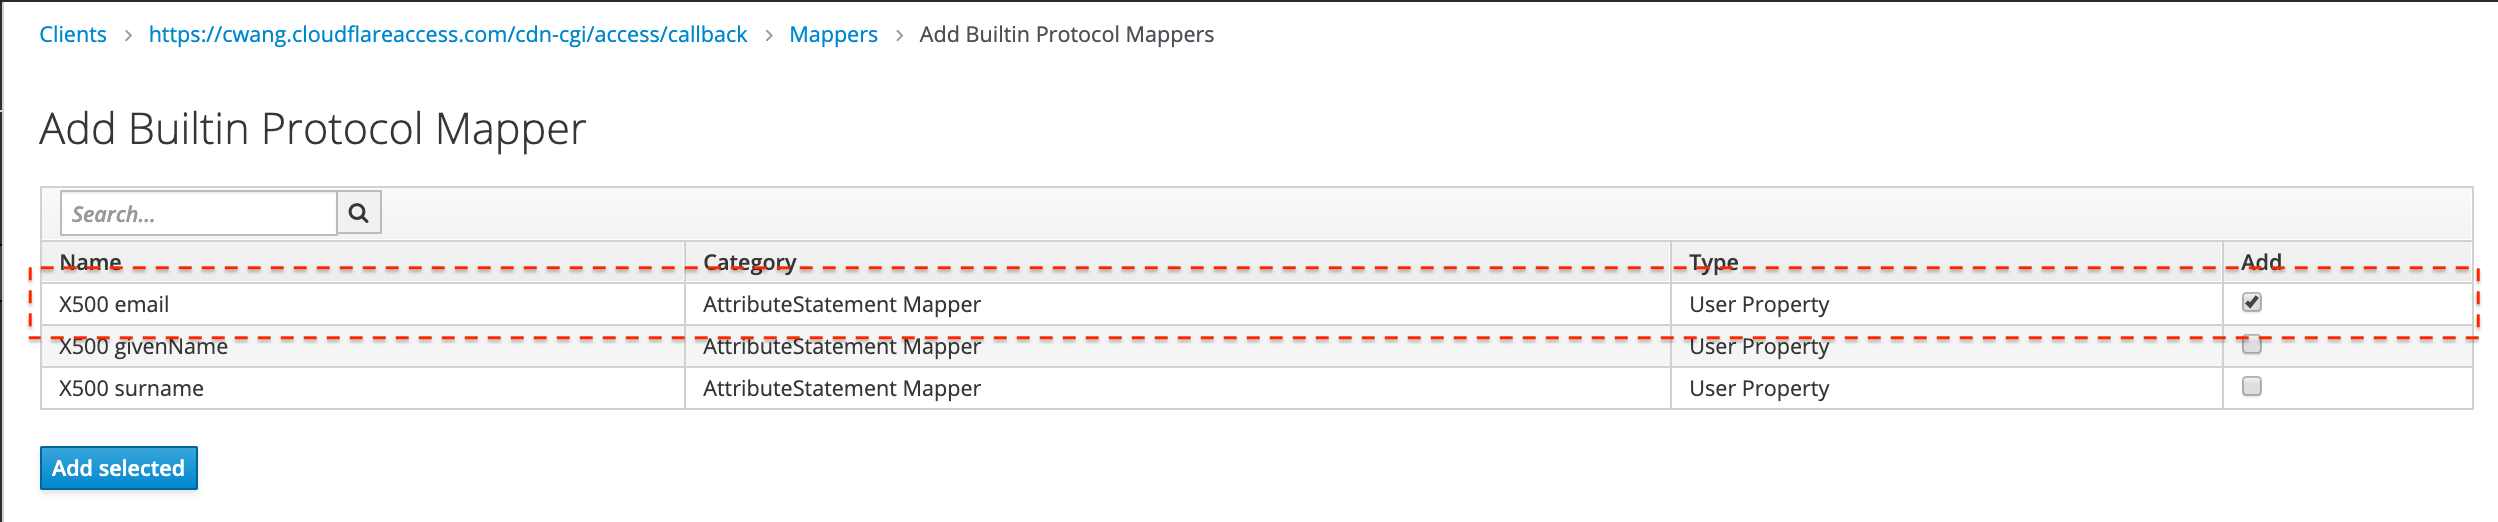 Protocol Mapper with email property set